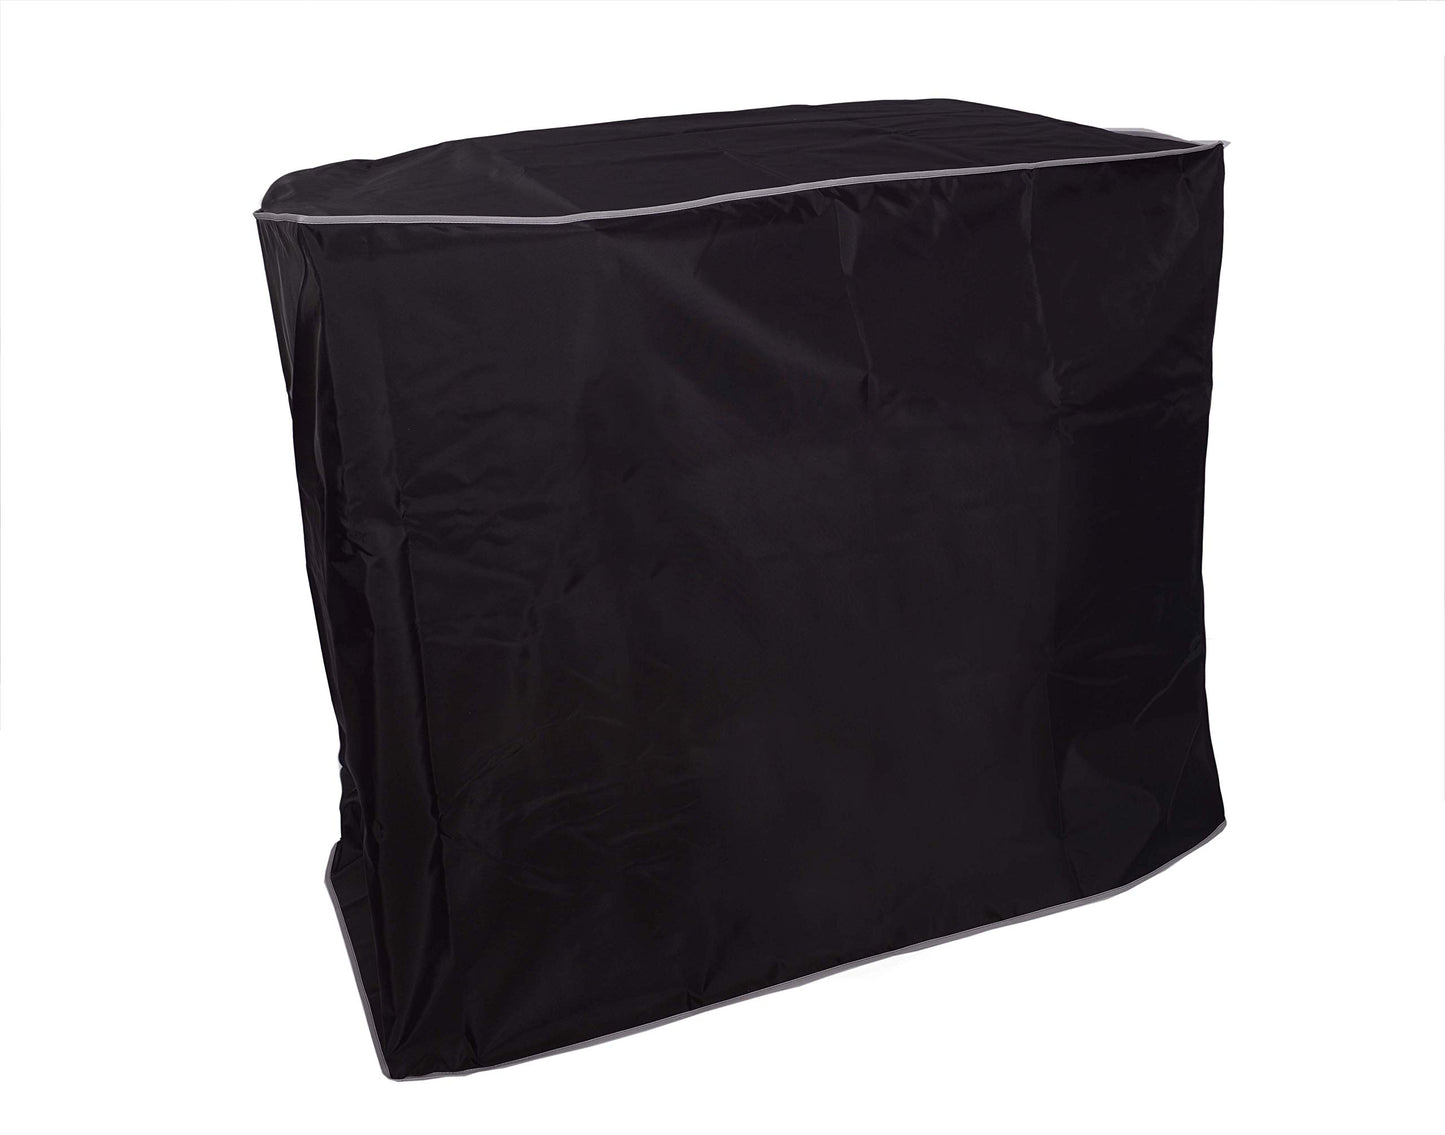 The Perfect Dust Cover, Black Nylon Cover for HP Latex 315 54-in Wide Format Inkjet Printer, Anti Static Waterproof Cover, Dimensions 91''W x 33''D x 54''H by The Perfect Dust Cover LLC